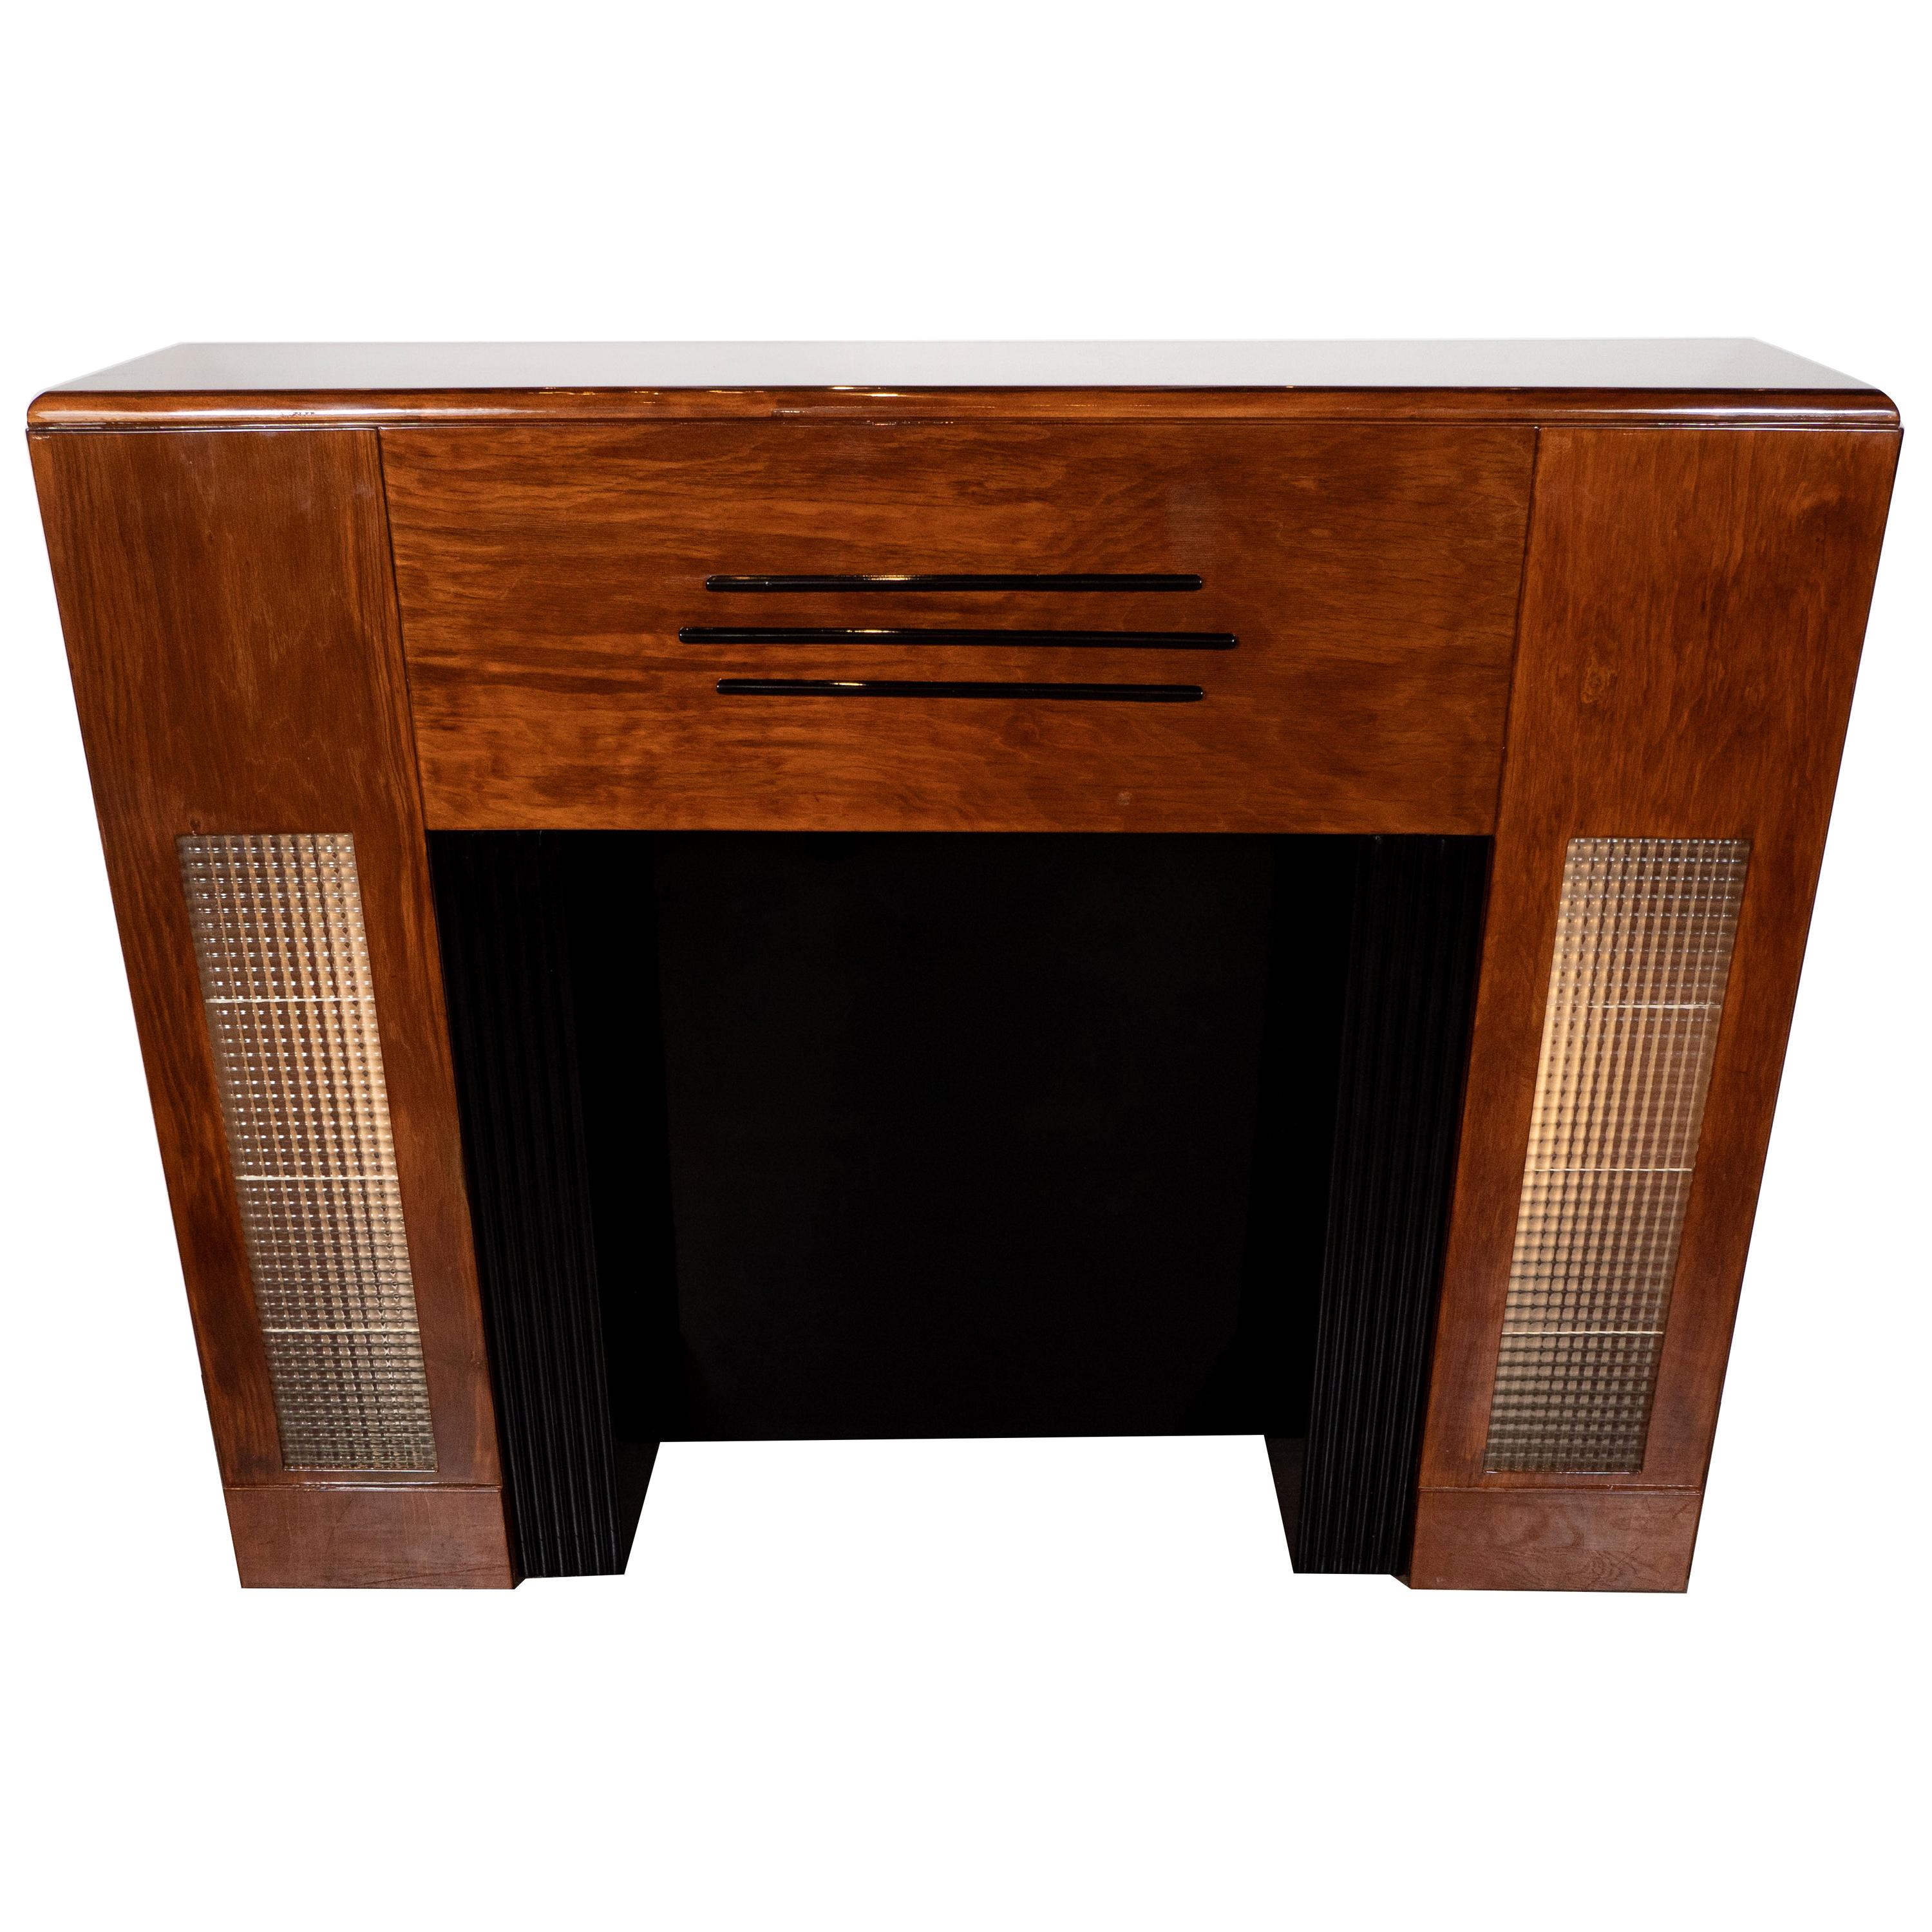 Art Deco Machine Age Bookmatched Walnut, Lacquer & Textured Glass Fireplace